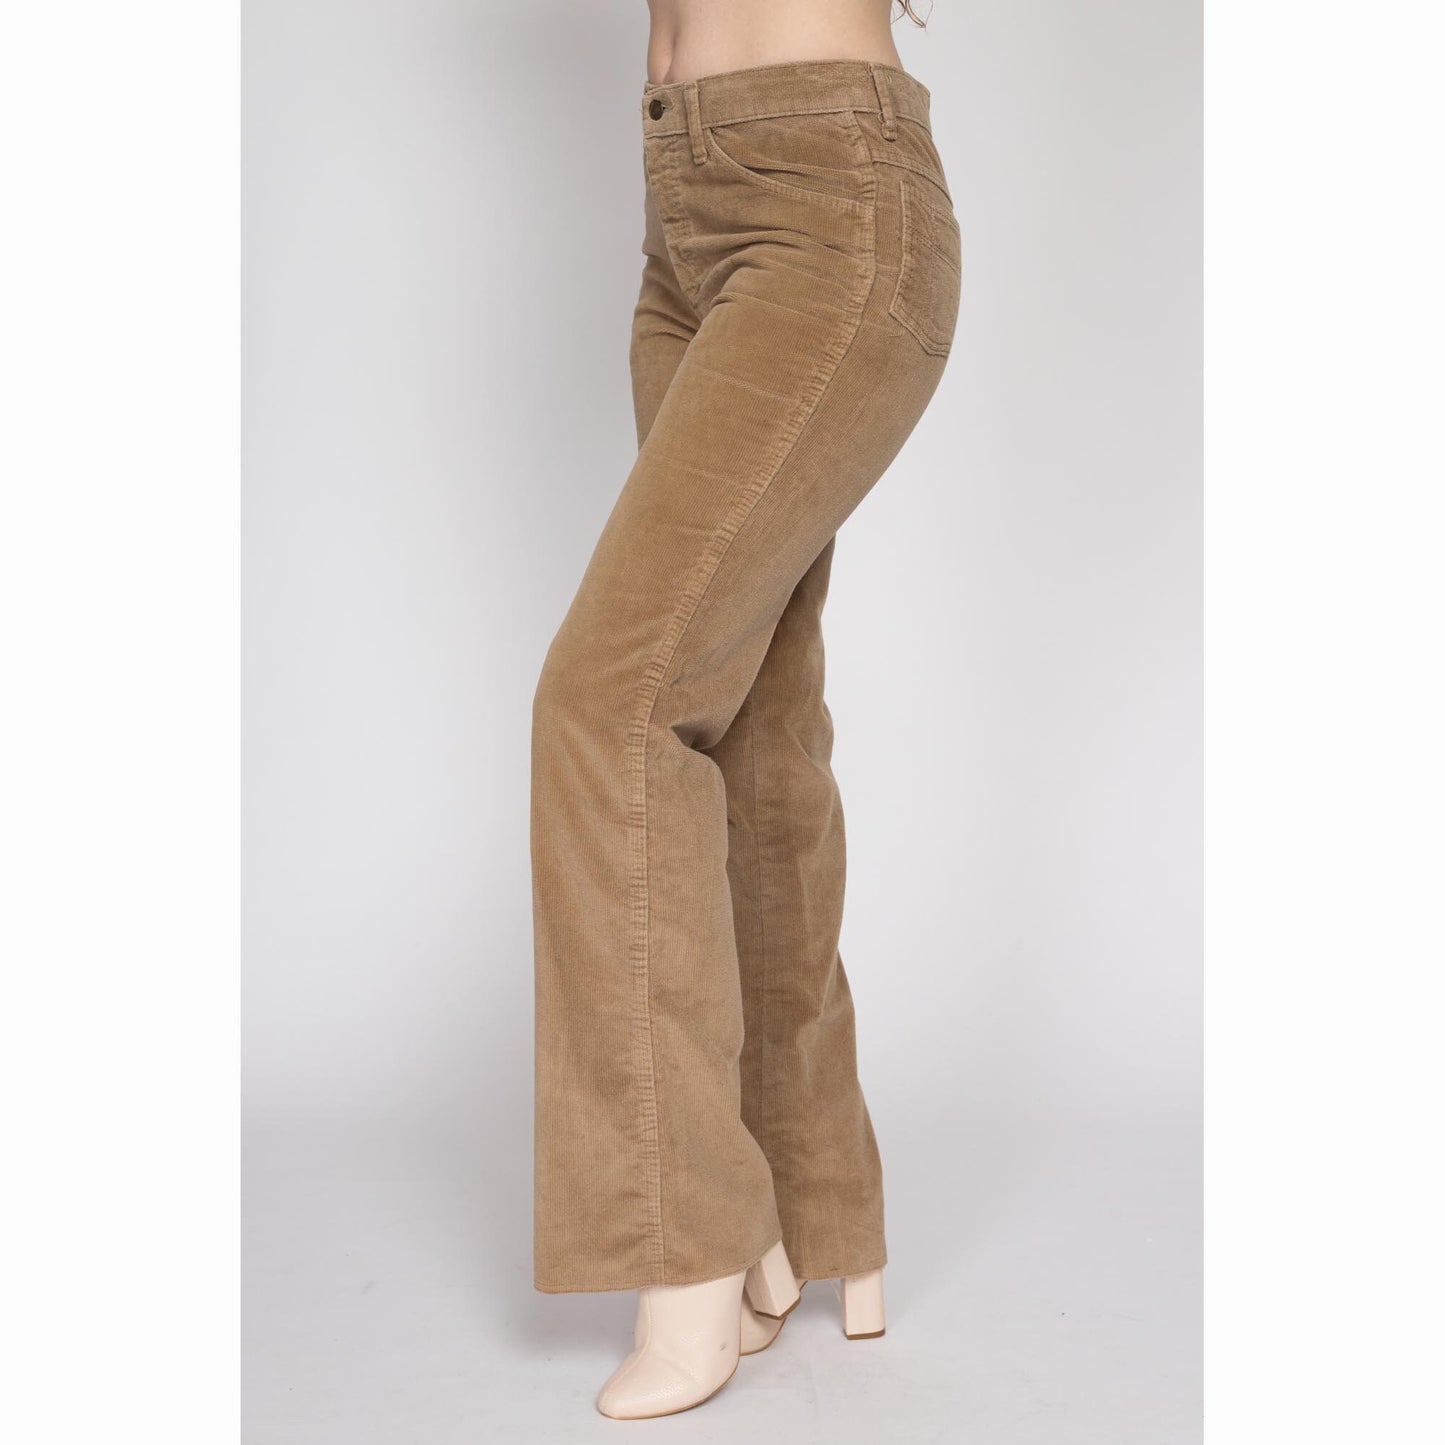 Medium 70s Tan Corduroy Mid Rise Flared Pants | Vintage Cords Retro Flared Hippie Trousers